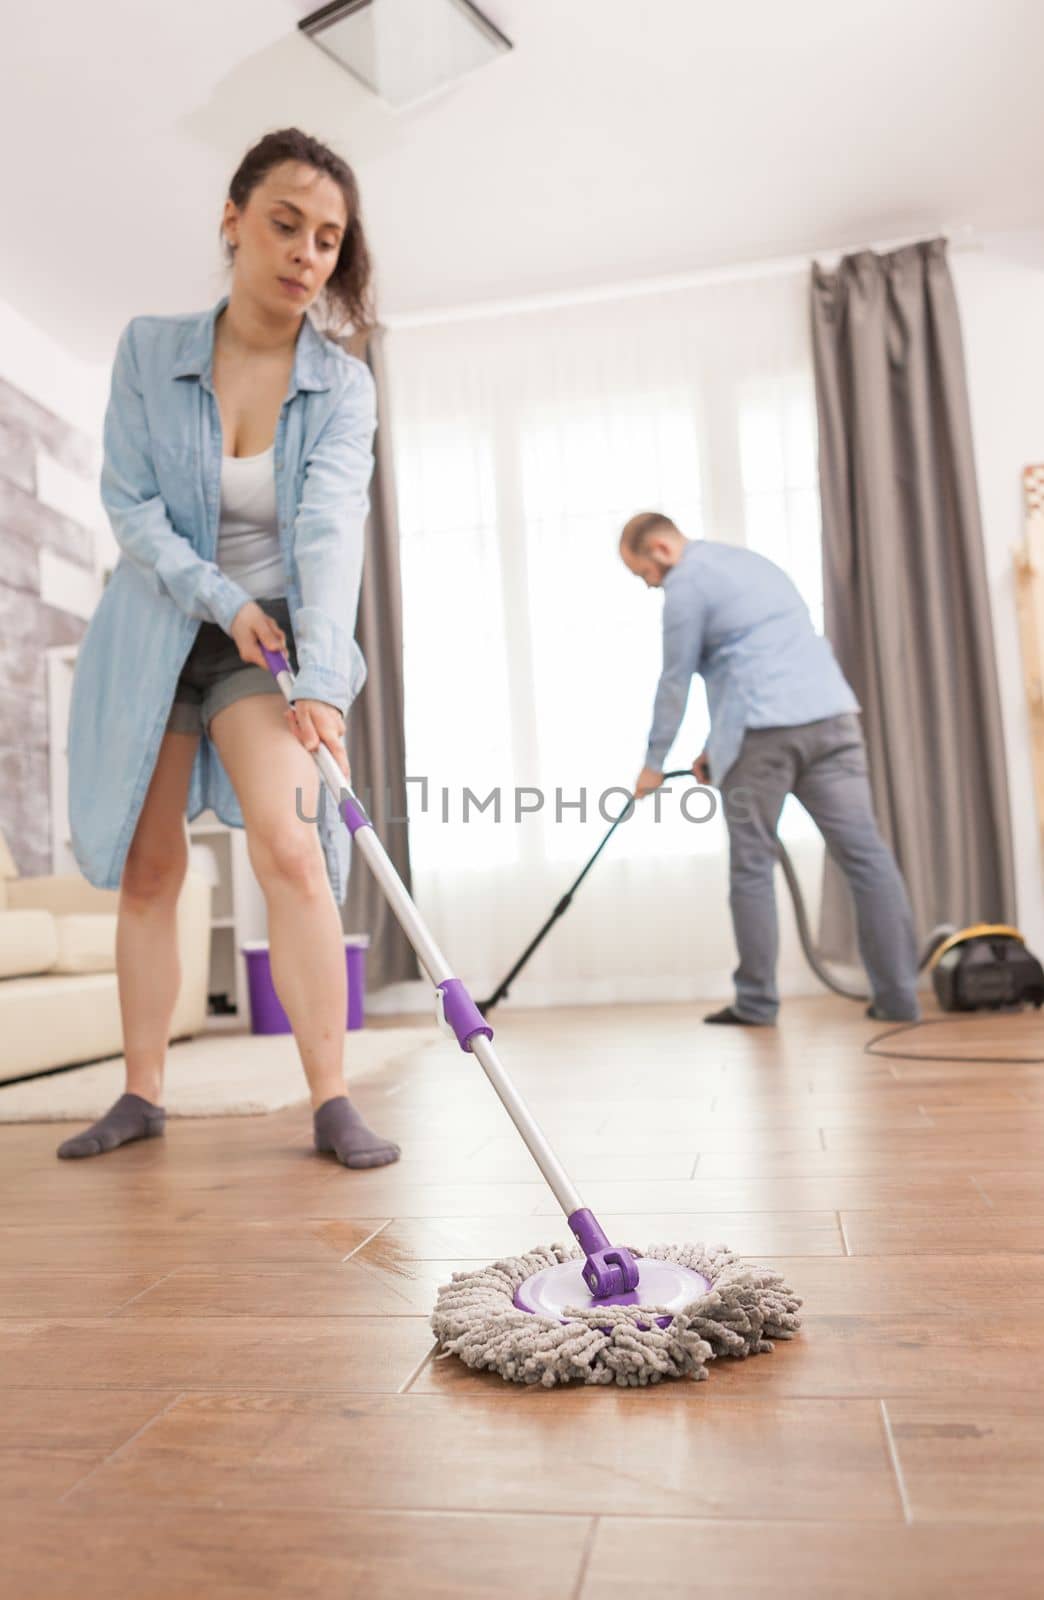 Woman wiping floor with mop in apartment.